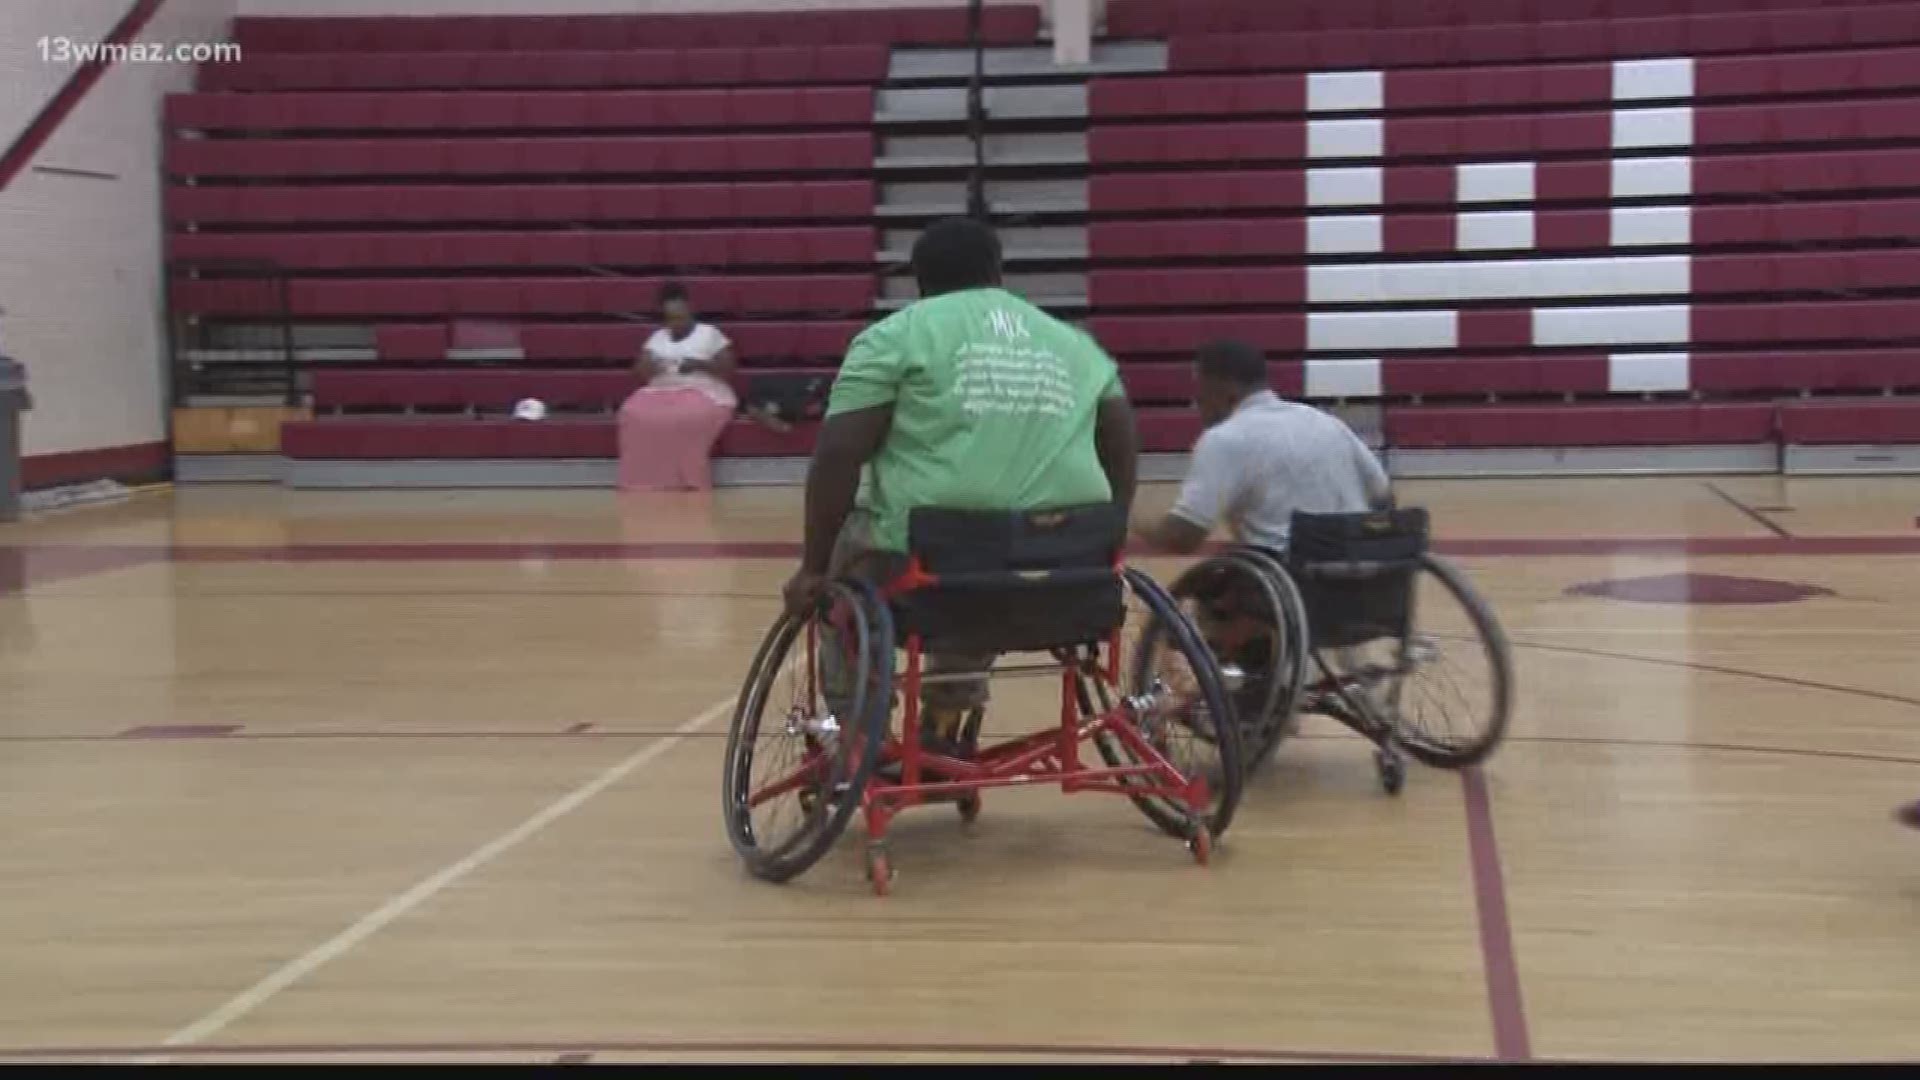 Warner Robins teen named 'Most positive adaptive athlete in Central Ga.'